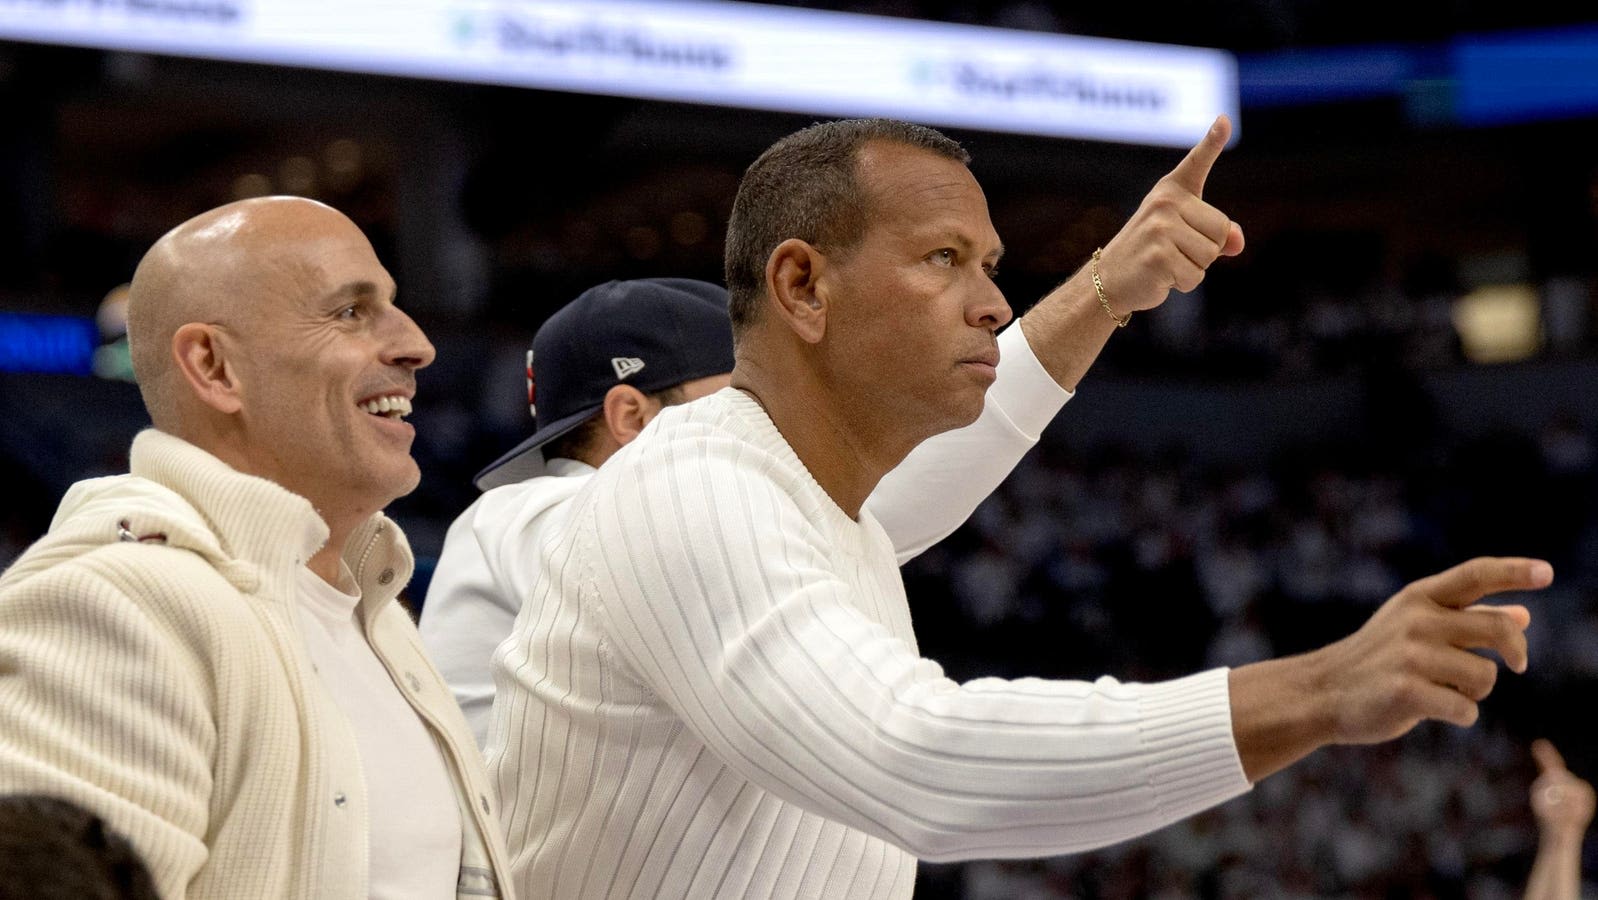 Timberwolves Ownership Fight Pits Alex Rodriguez Against Billionaire During Generational Playoff Run: Here’s What To Know